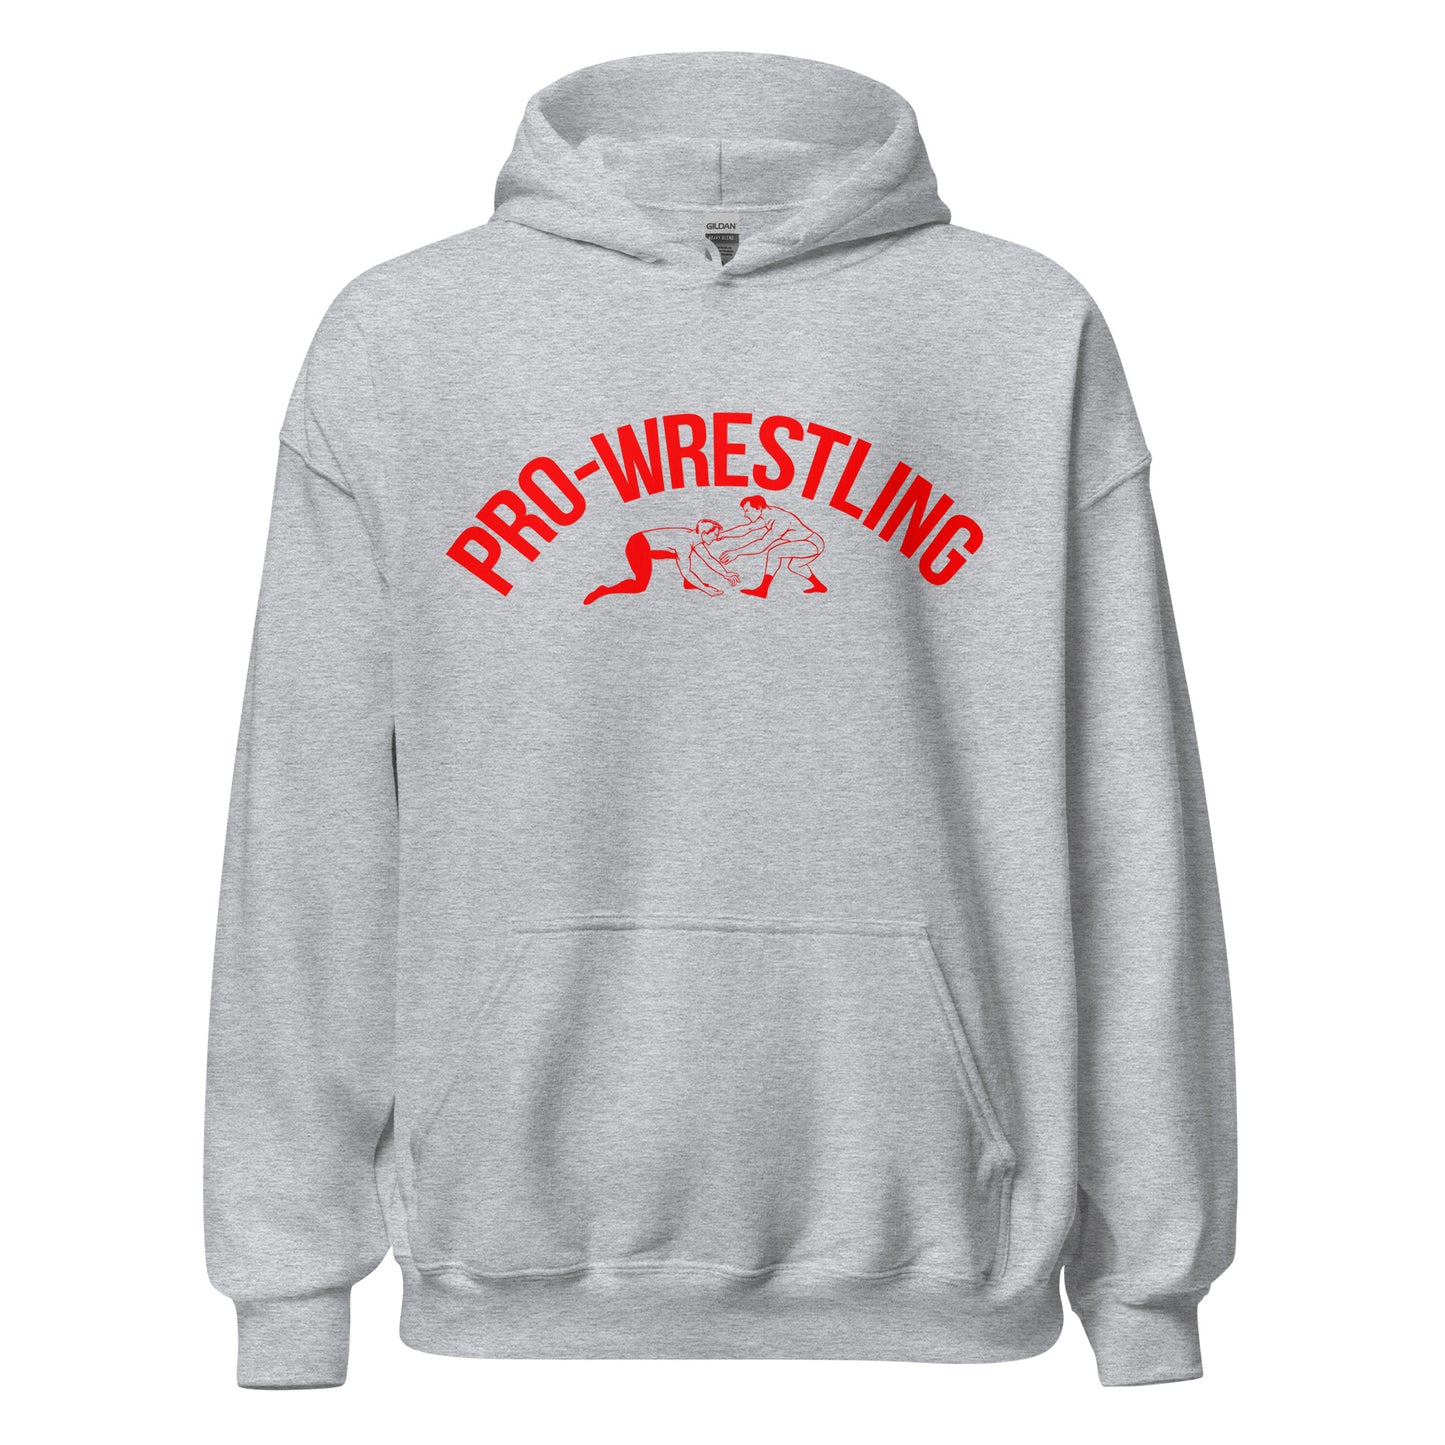 The Original Pro Wrestling Hoodie (red text)